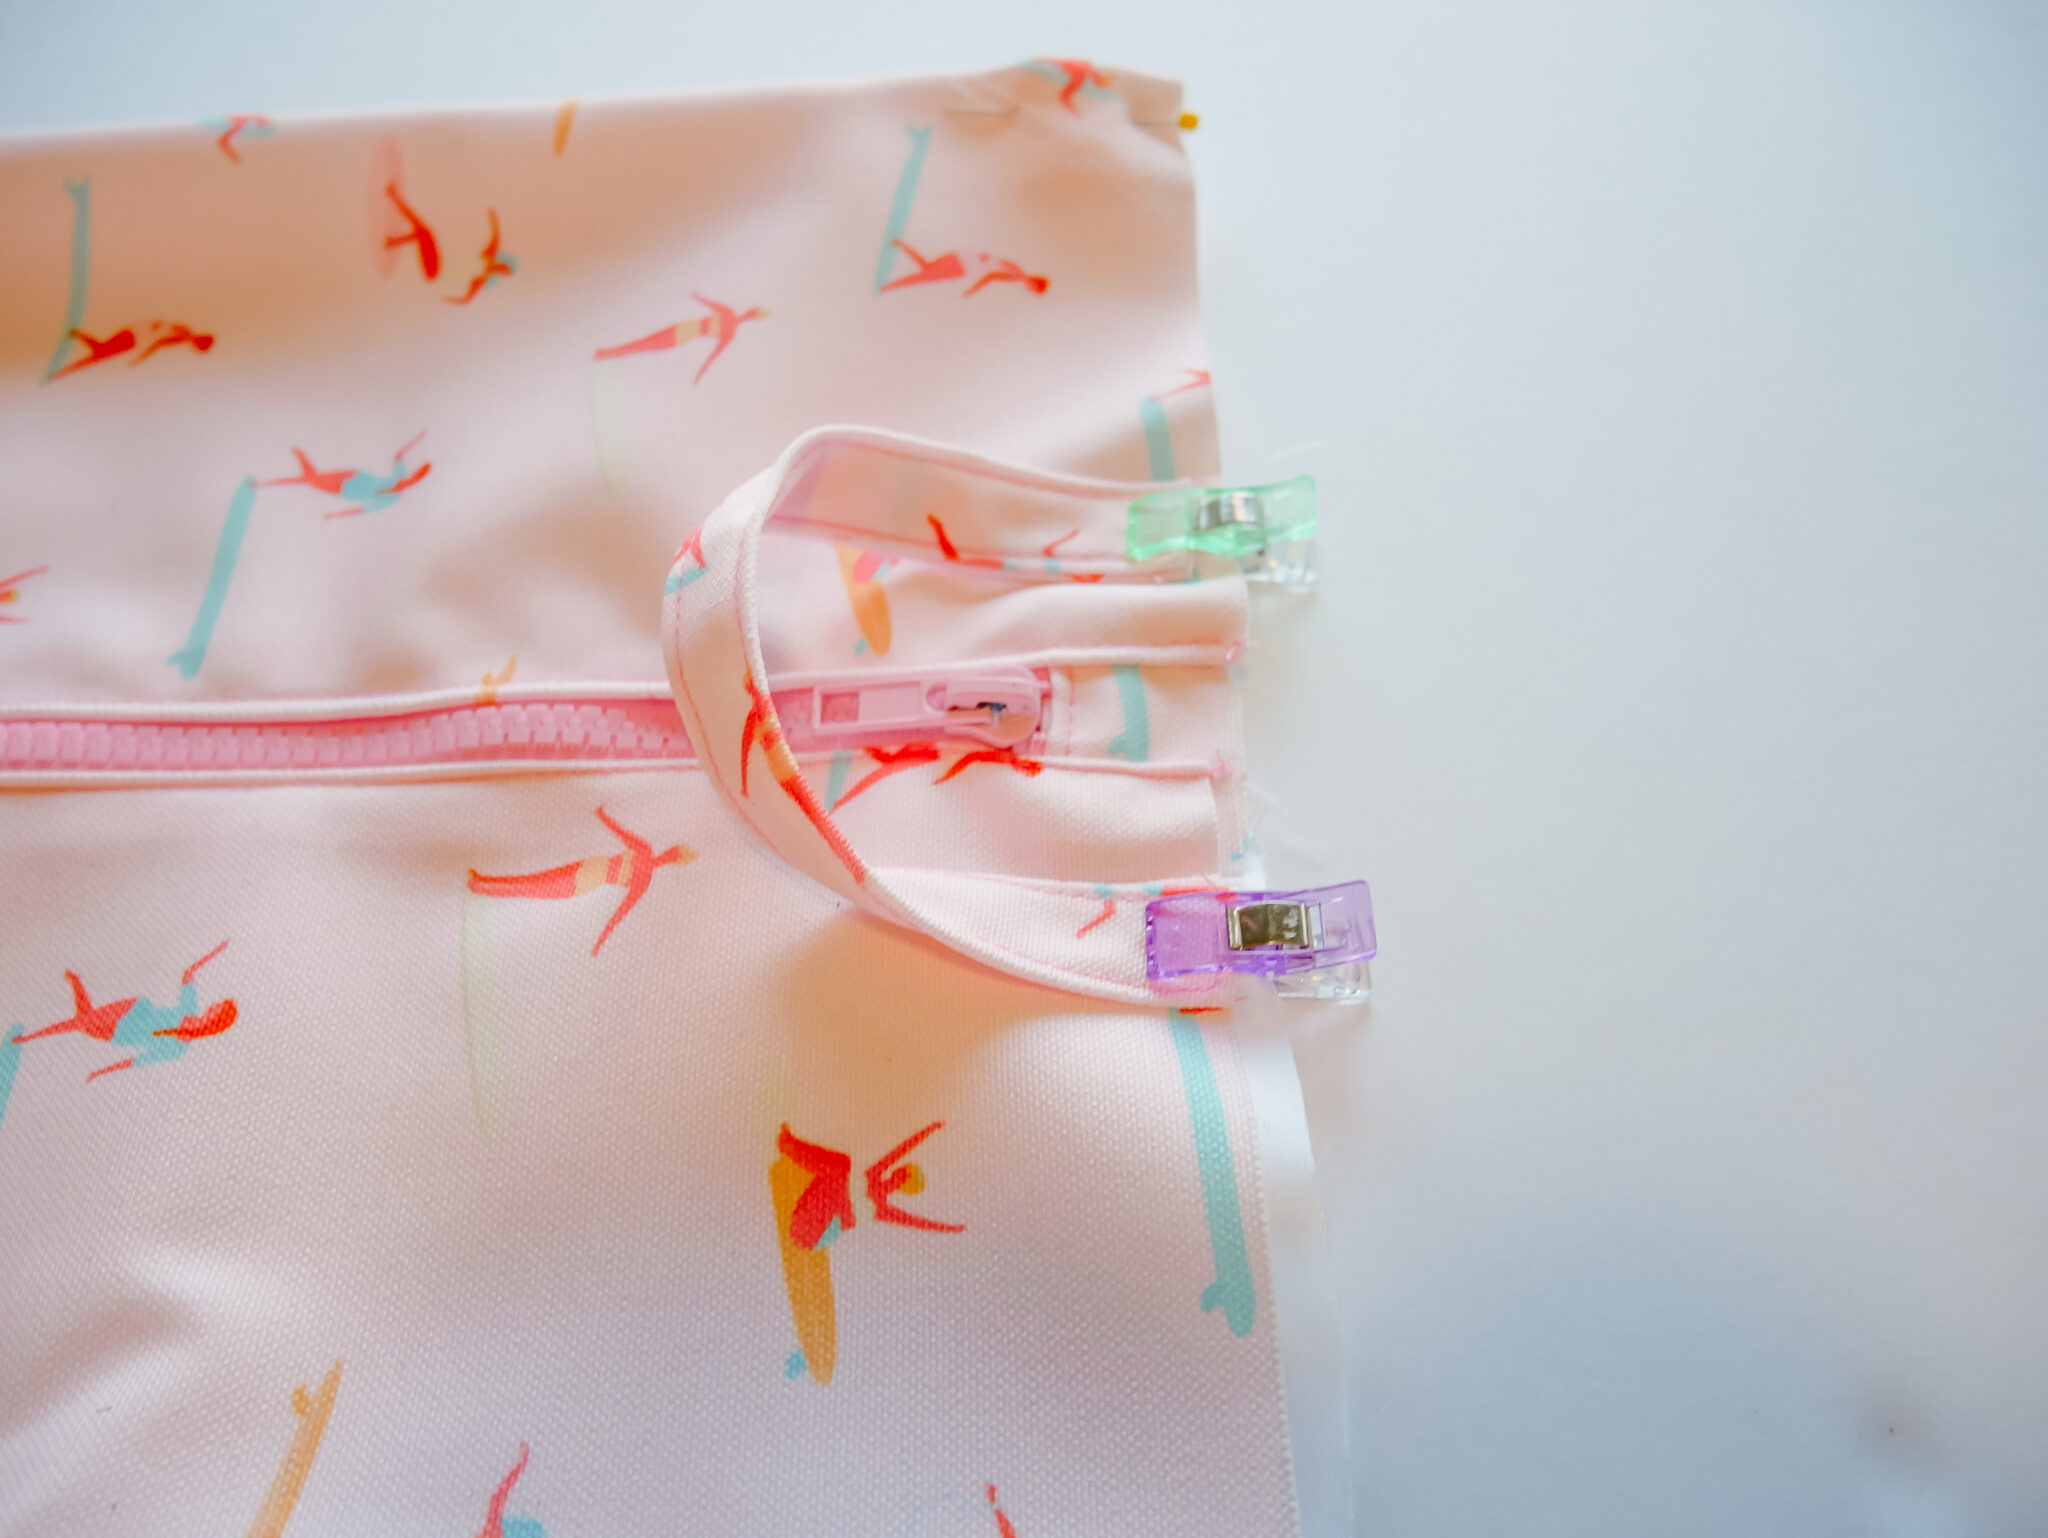 A fabric rectangle featuring a design with small female surfers surfing through a pink background lays on a white surface. A pink zipper has been stitched up the middle. A U-shaped handle in the same fabric has been placed to the center right of the rectangle and is being held together by small clips.